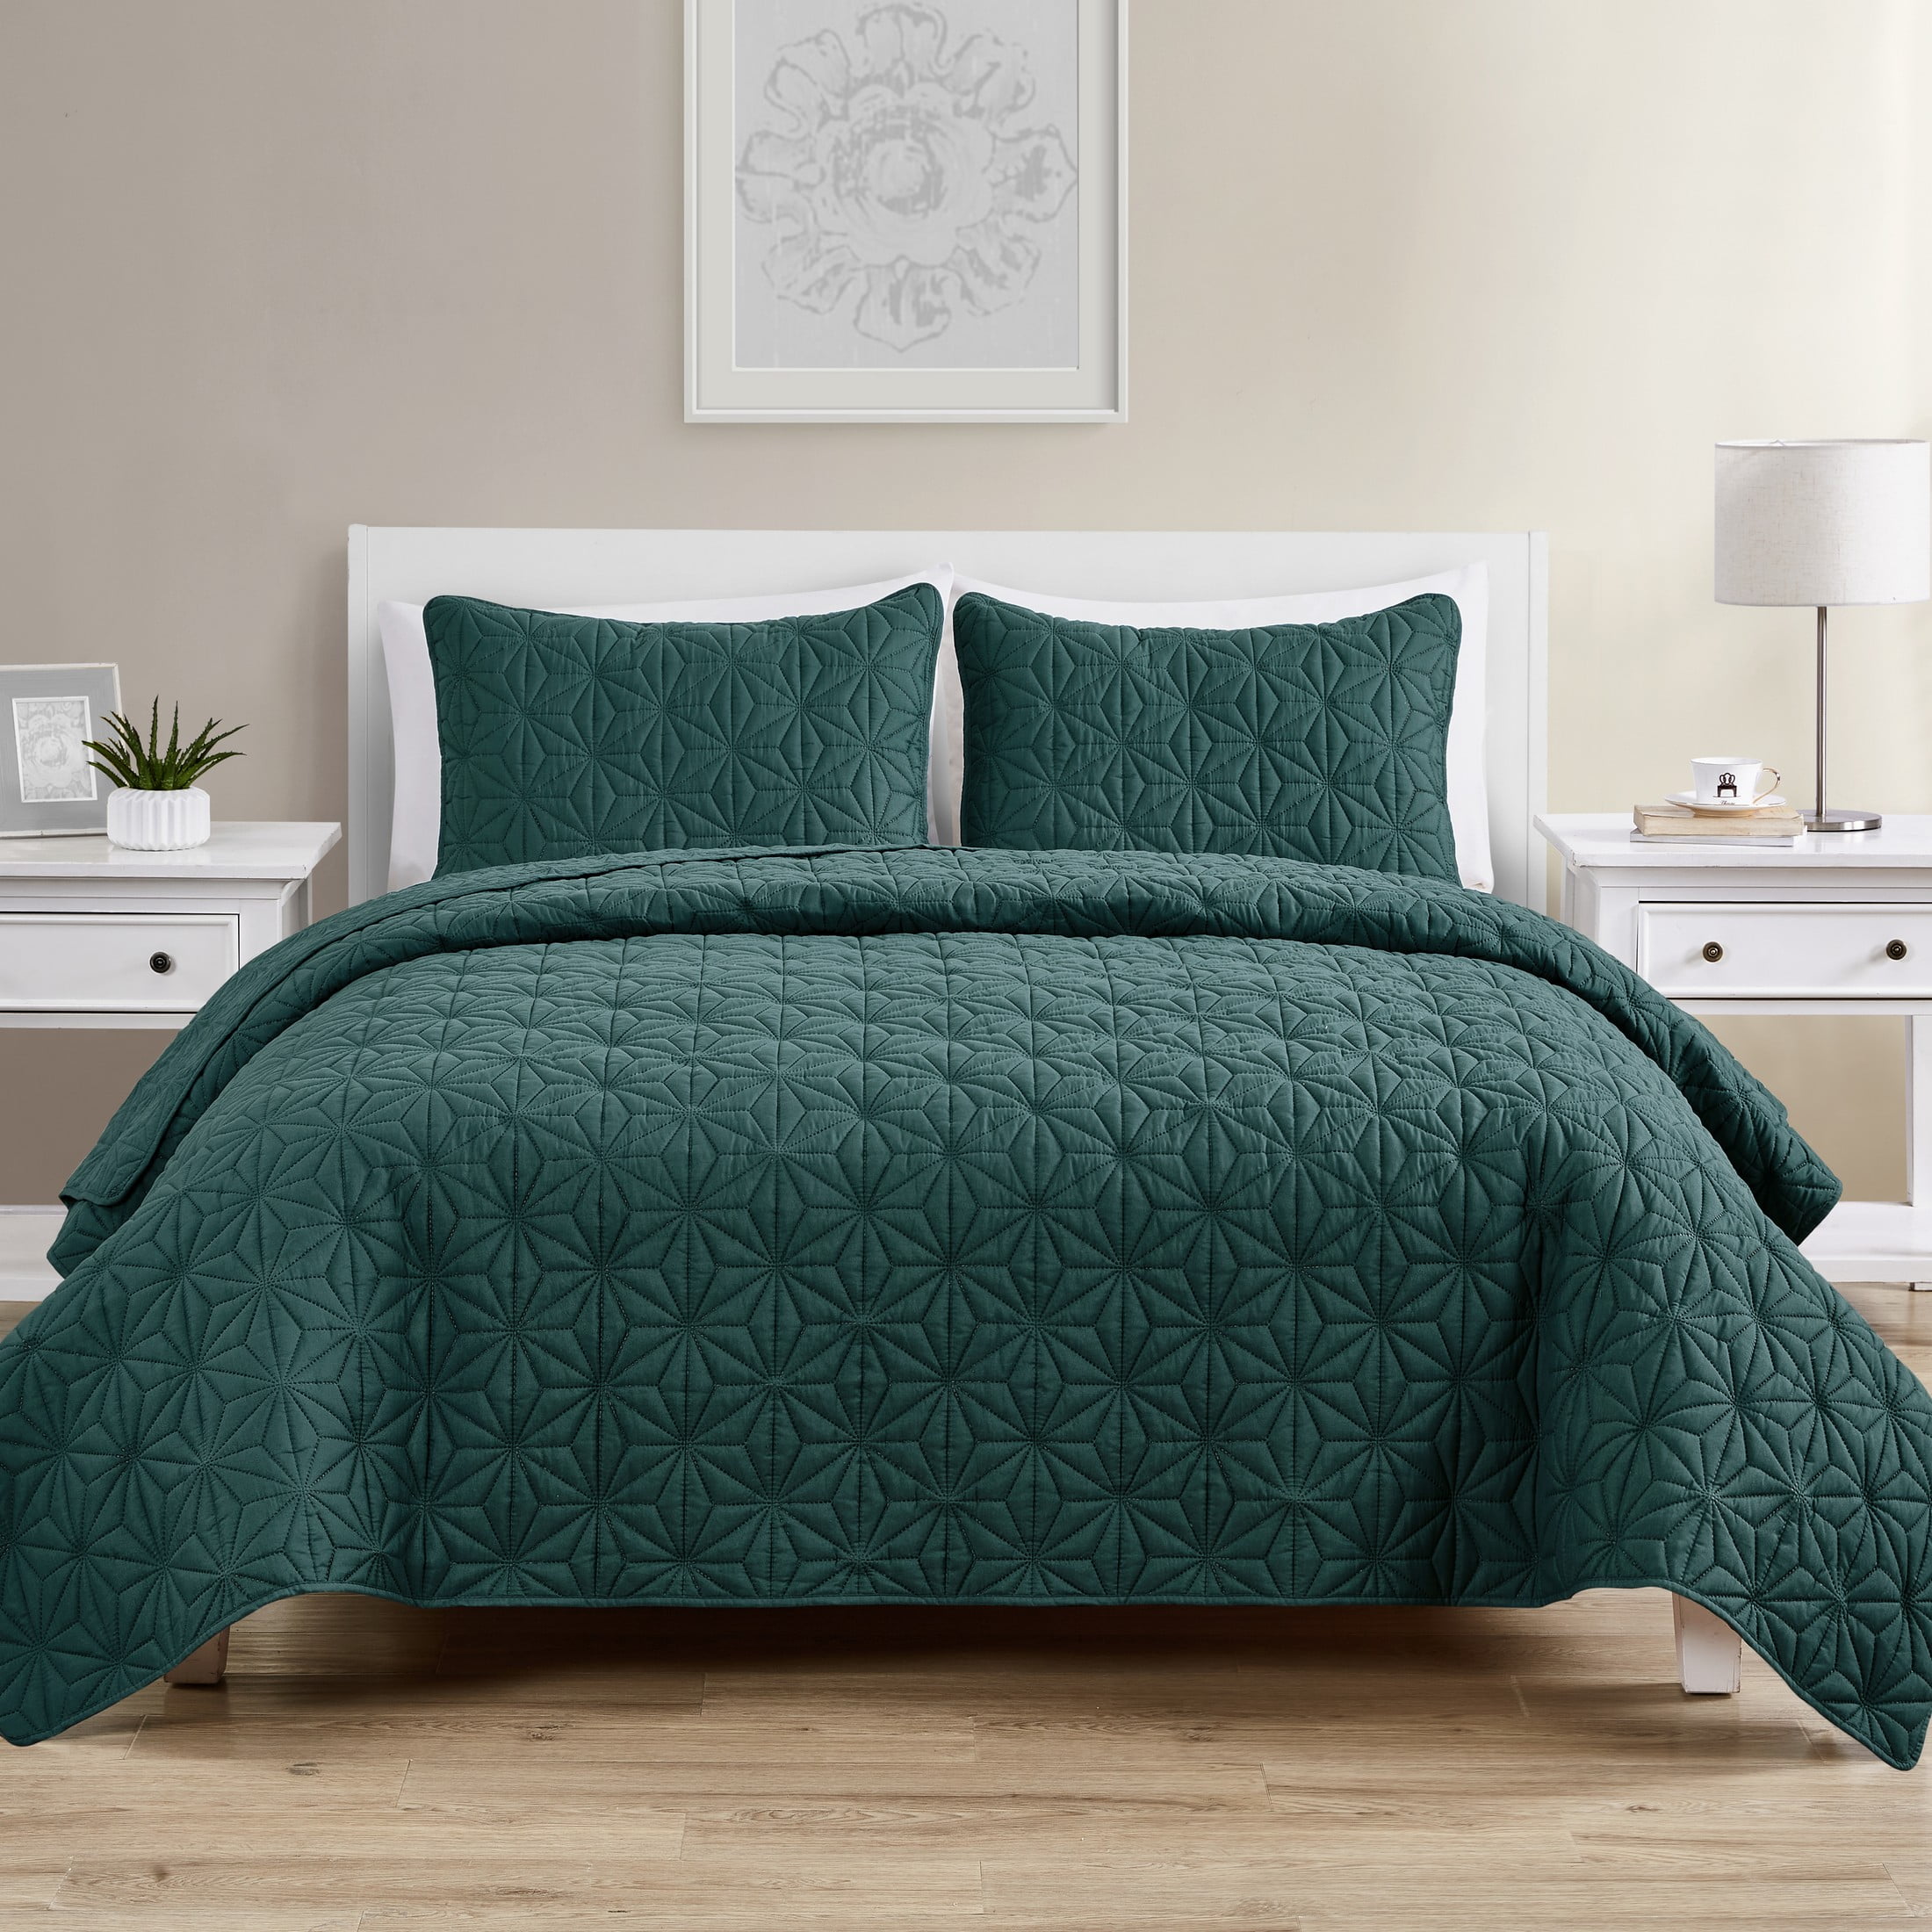 All Seas Full/Queen Quilt Set Details about   3-Piece Shell Stitched Solid Quilt Set with Sham 